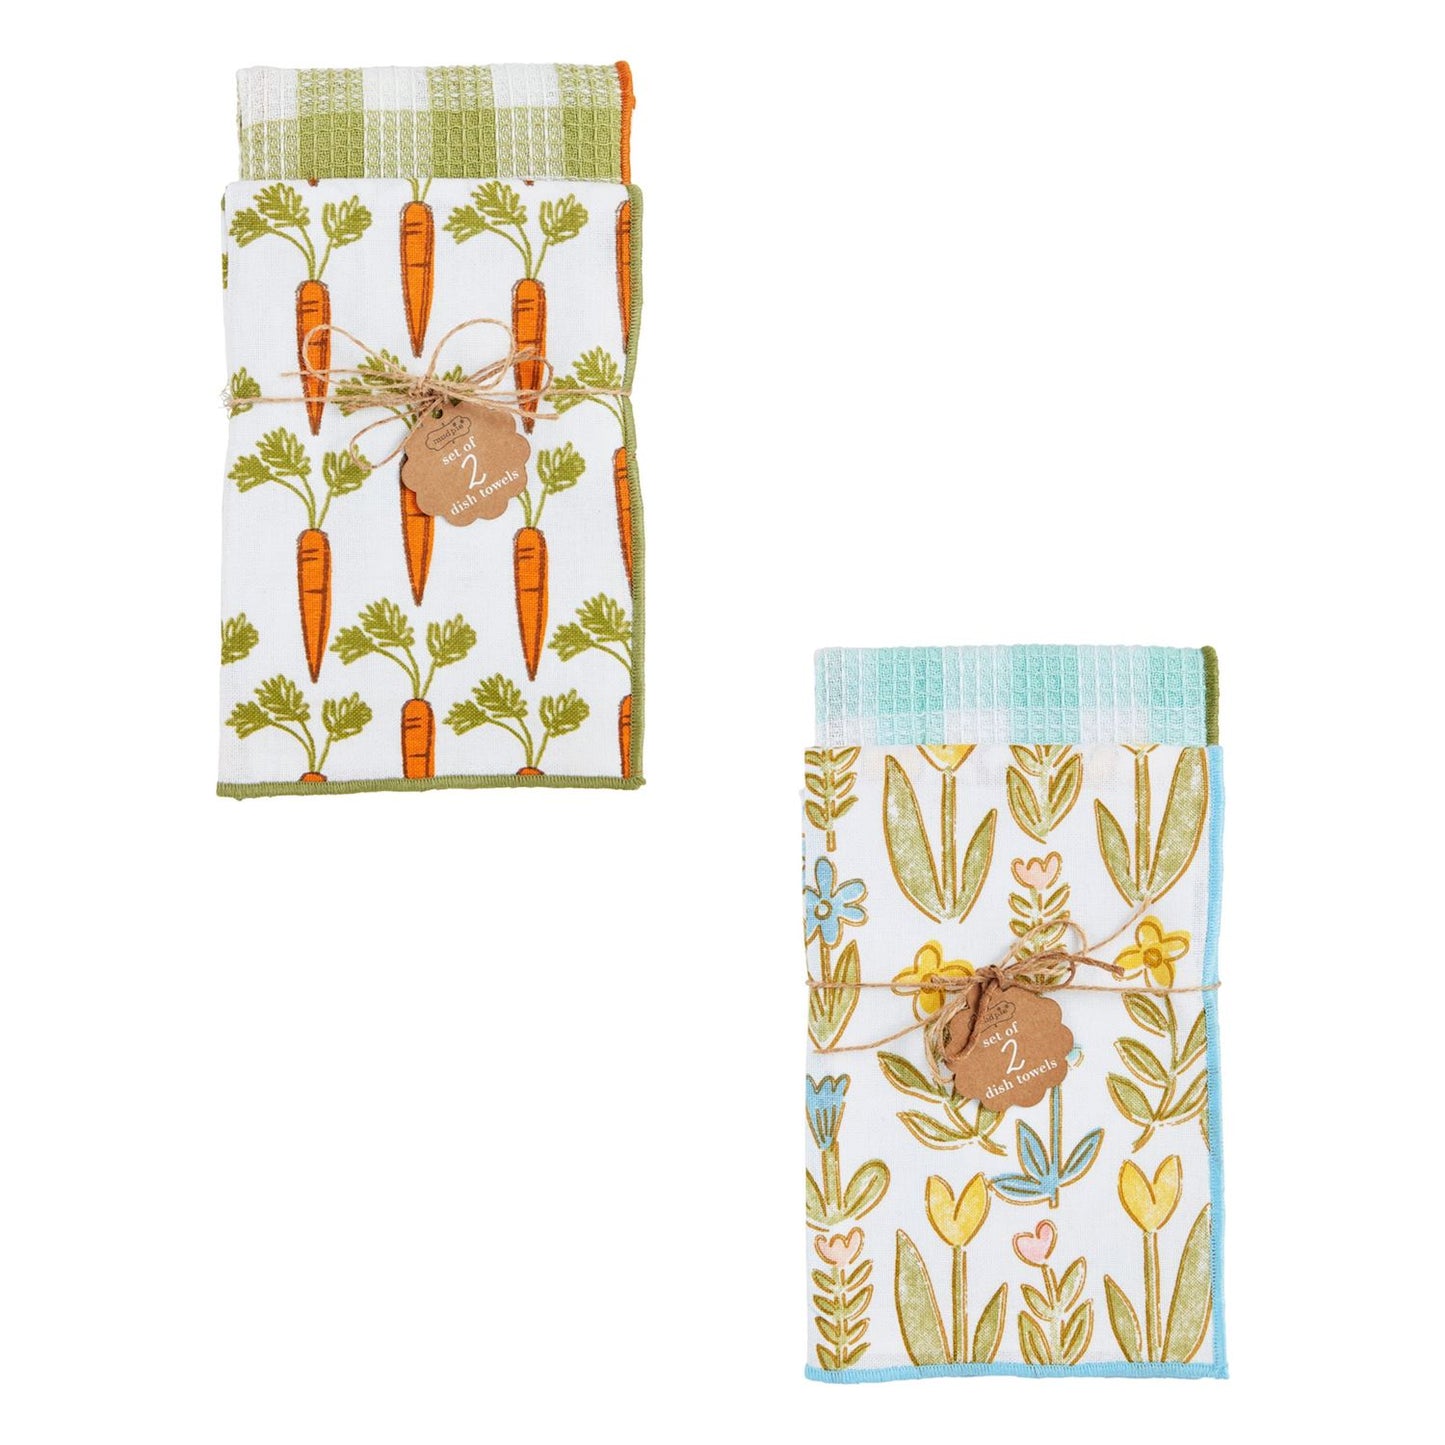 both styles of spring towels sets on a white background.